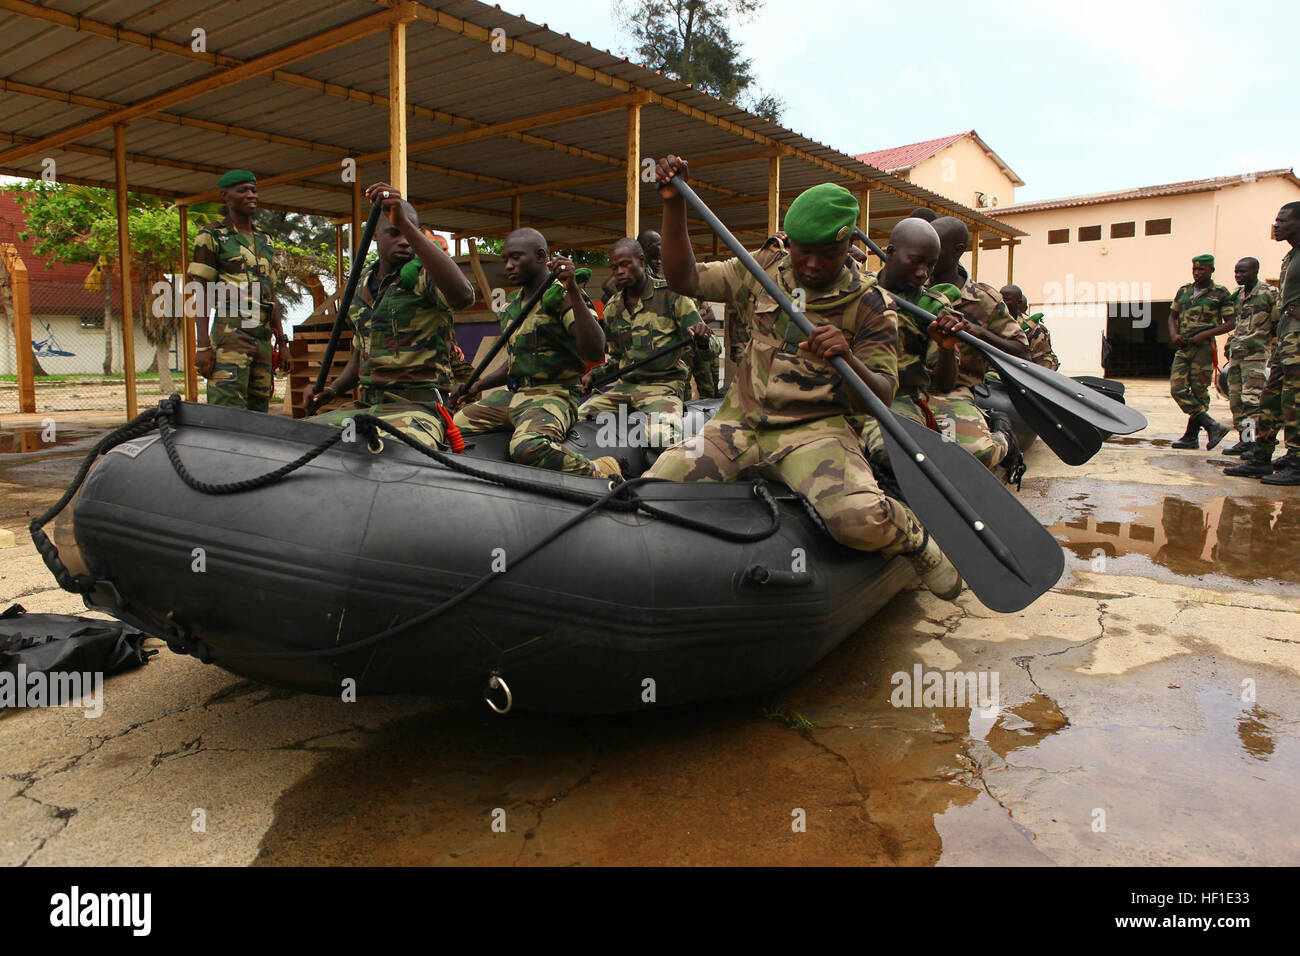 Senegalese Companie de Fusilier Marine Commandos practice basic boat commands in a Zodiac after receiving classes by Marines and sailors with Special-Purpose Marine Air-Ground Task Force Africa 13 on Bel Air Naval Base in Dakar, Senegal, Aug. 12, 2013. Special-Purpose MAGTF Africa strengthens U.S. Marine Corps Forces Africa and U.S. Africa Command's ability to assist partner nations in theater security cooperation and military-to-military engagements. Special-Purpose MAGTF Africa's current iteration is the fourth rotation working with the Senegalese Forces. (U.S. Marine Corps photo by Cpl. Rya Stock Photo